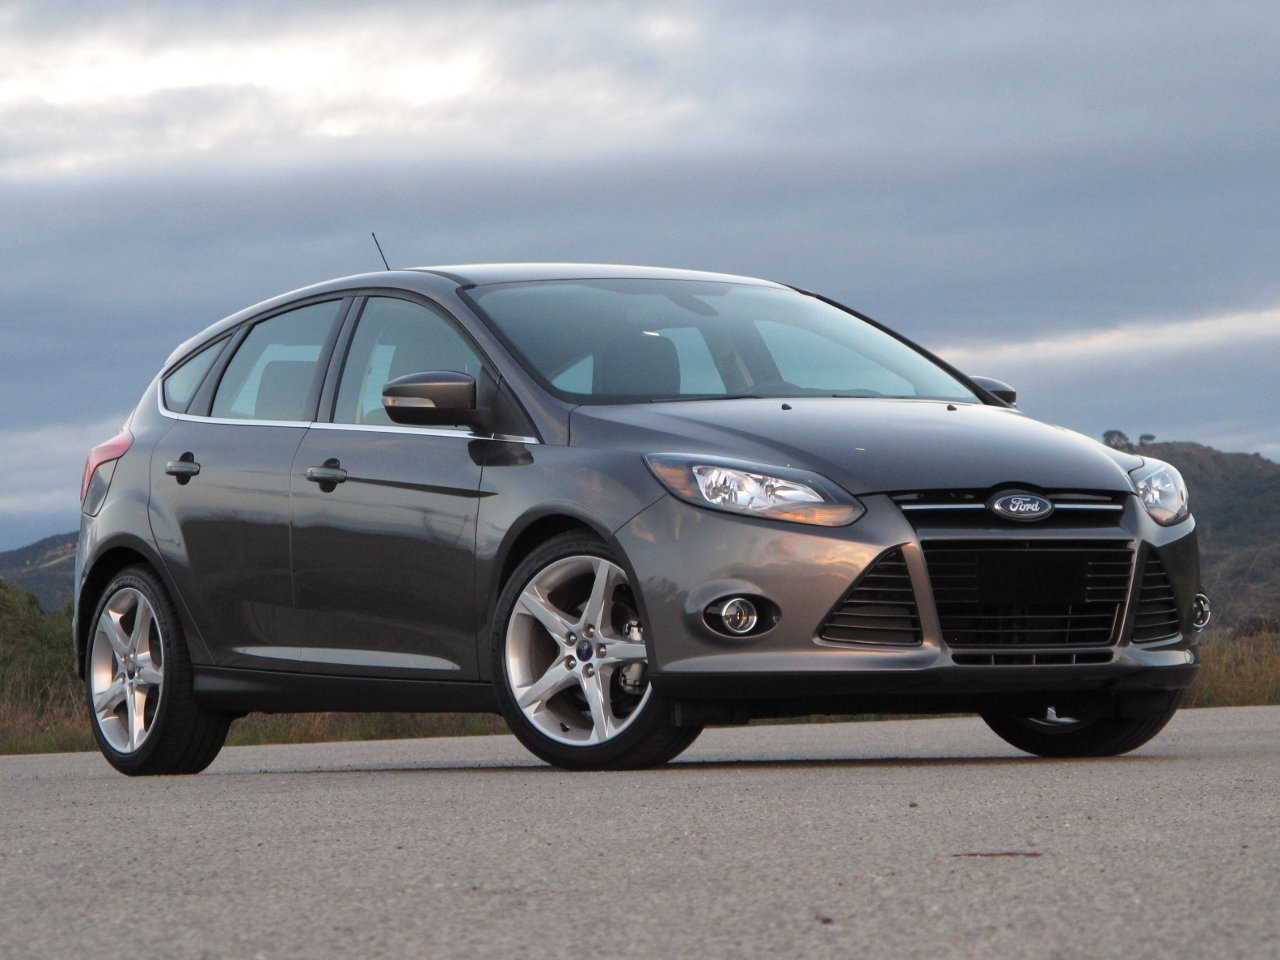 Used 2012 Ford Focus Sedan Pricing & Features | Edmunds